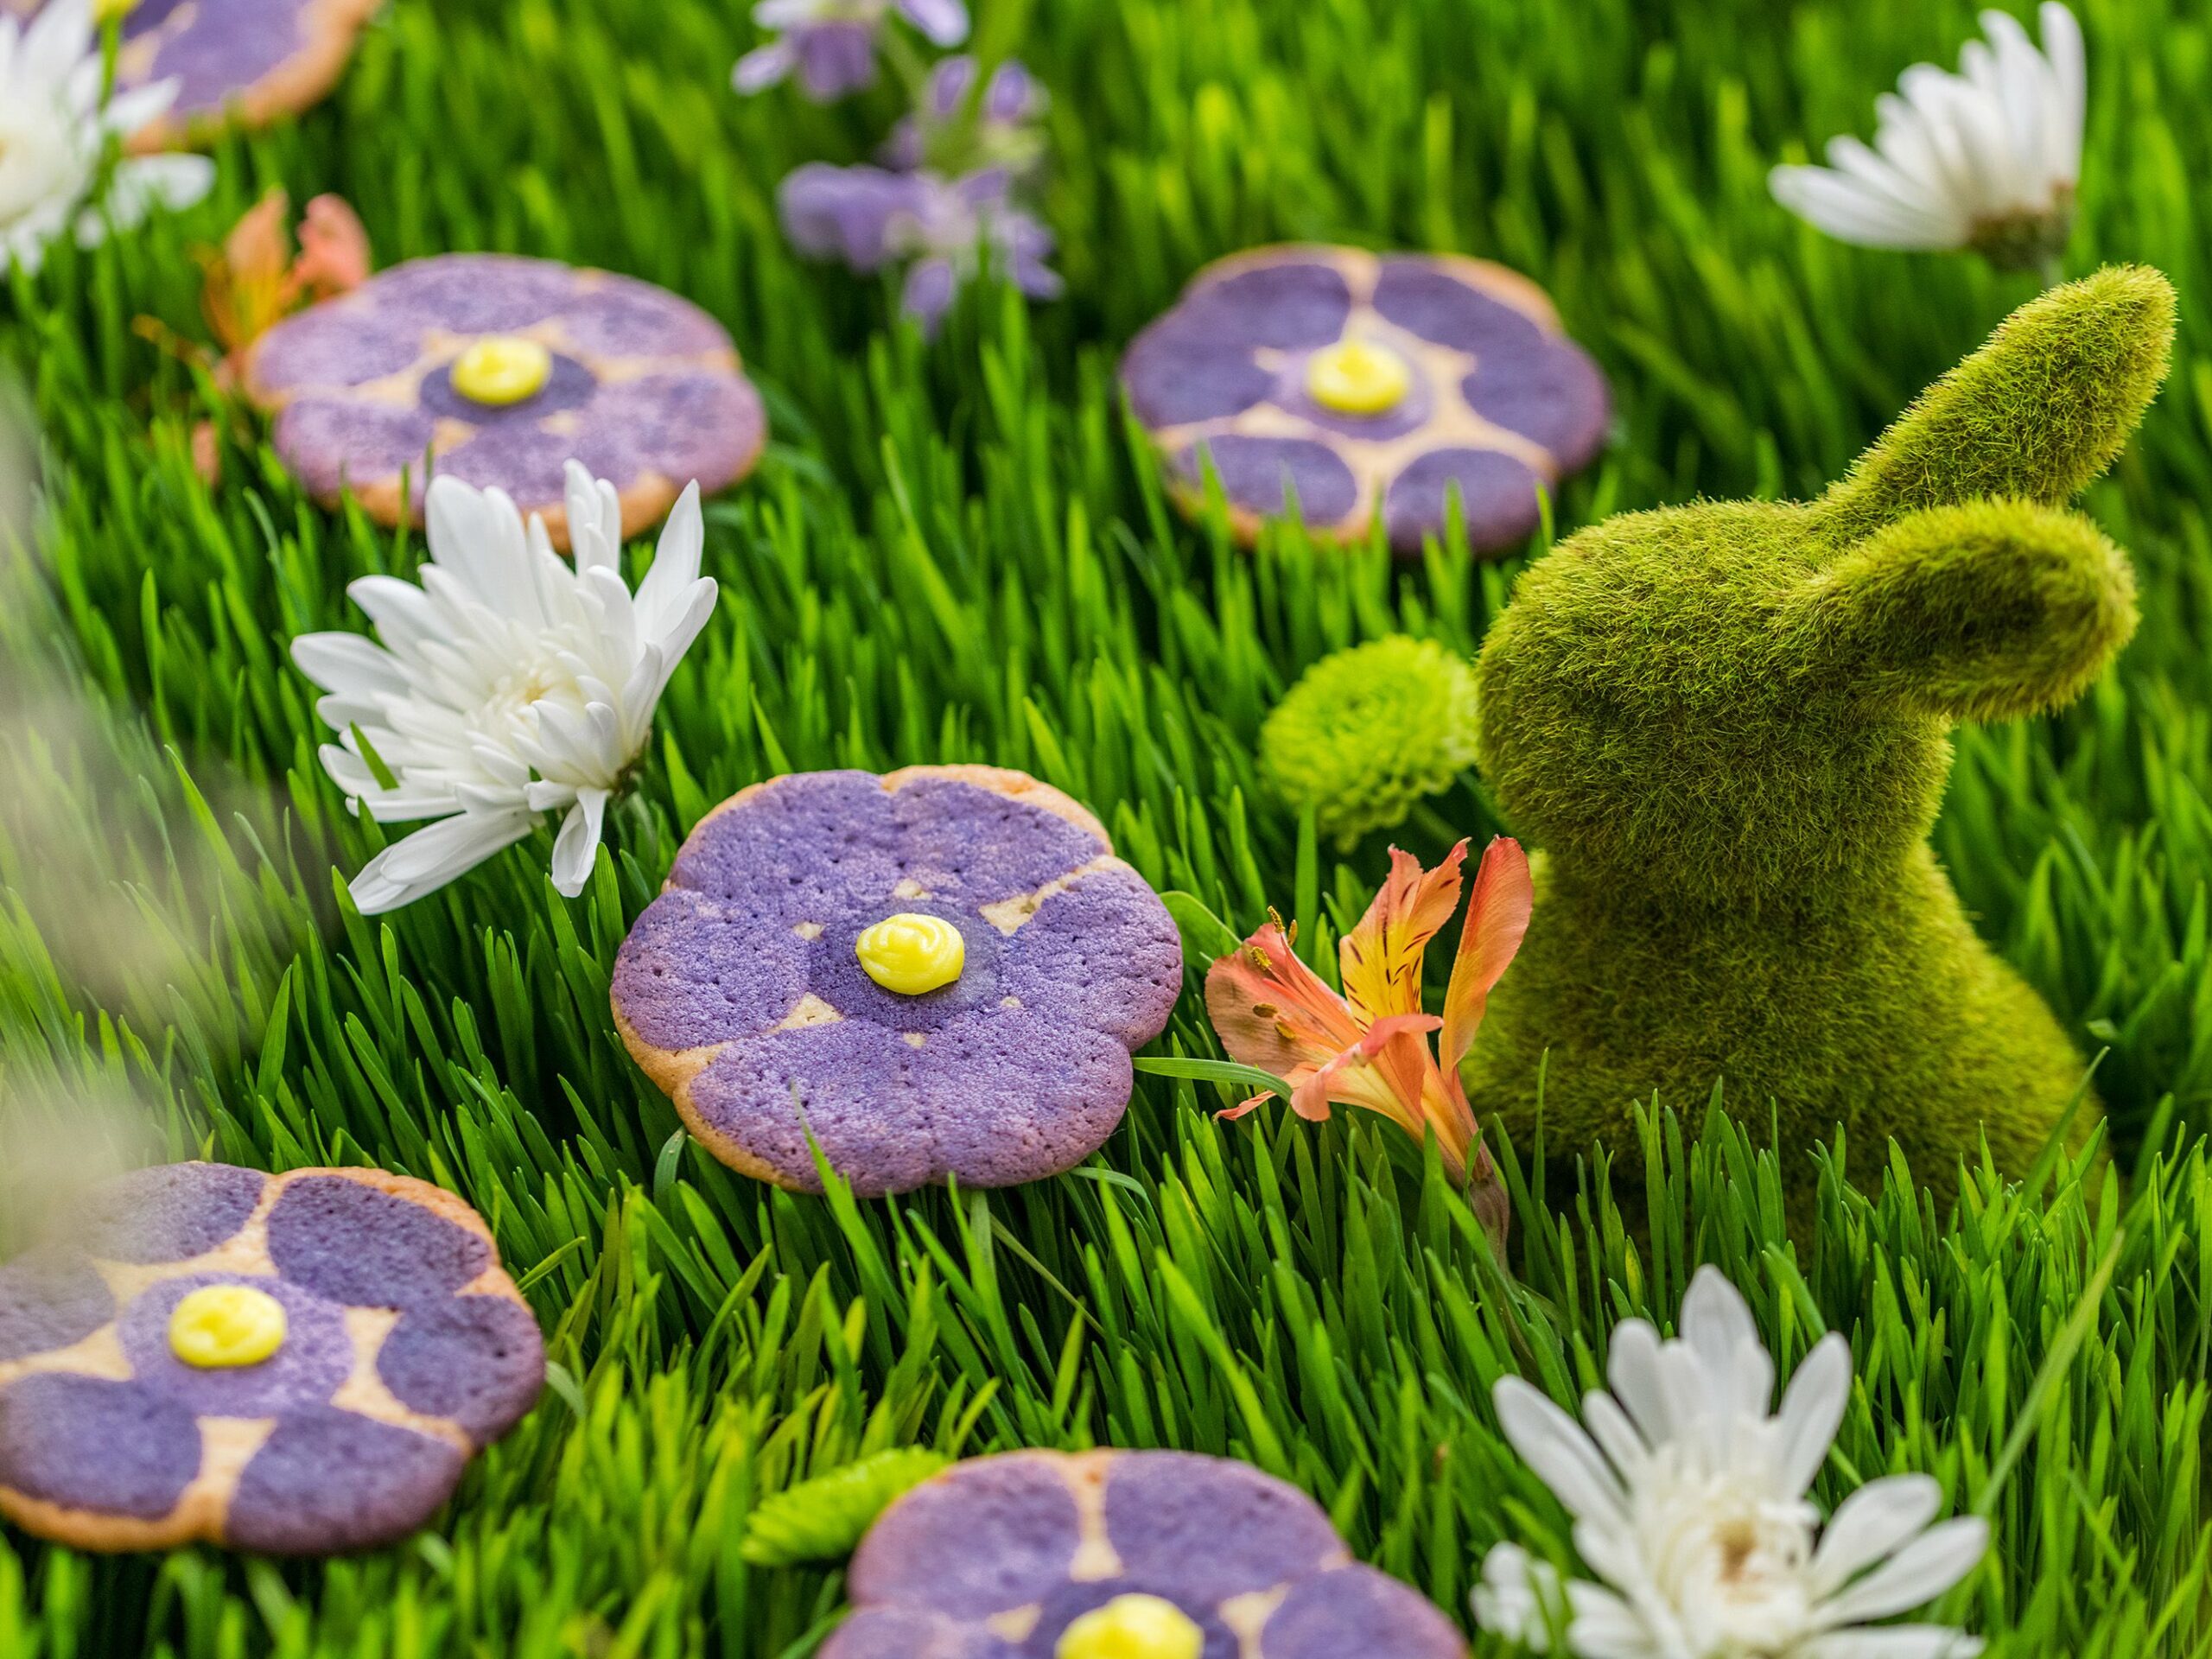 Easter cookie recipes you’ll make every year - Food and Cooking - News